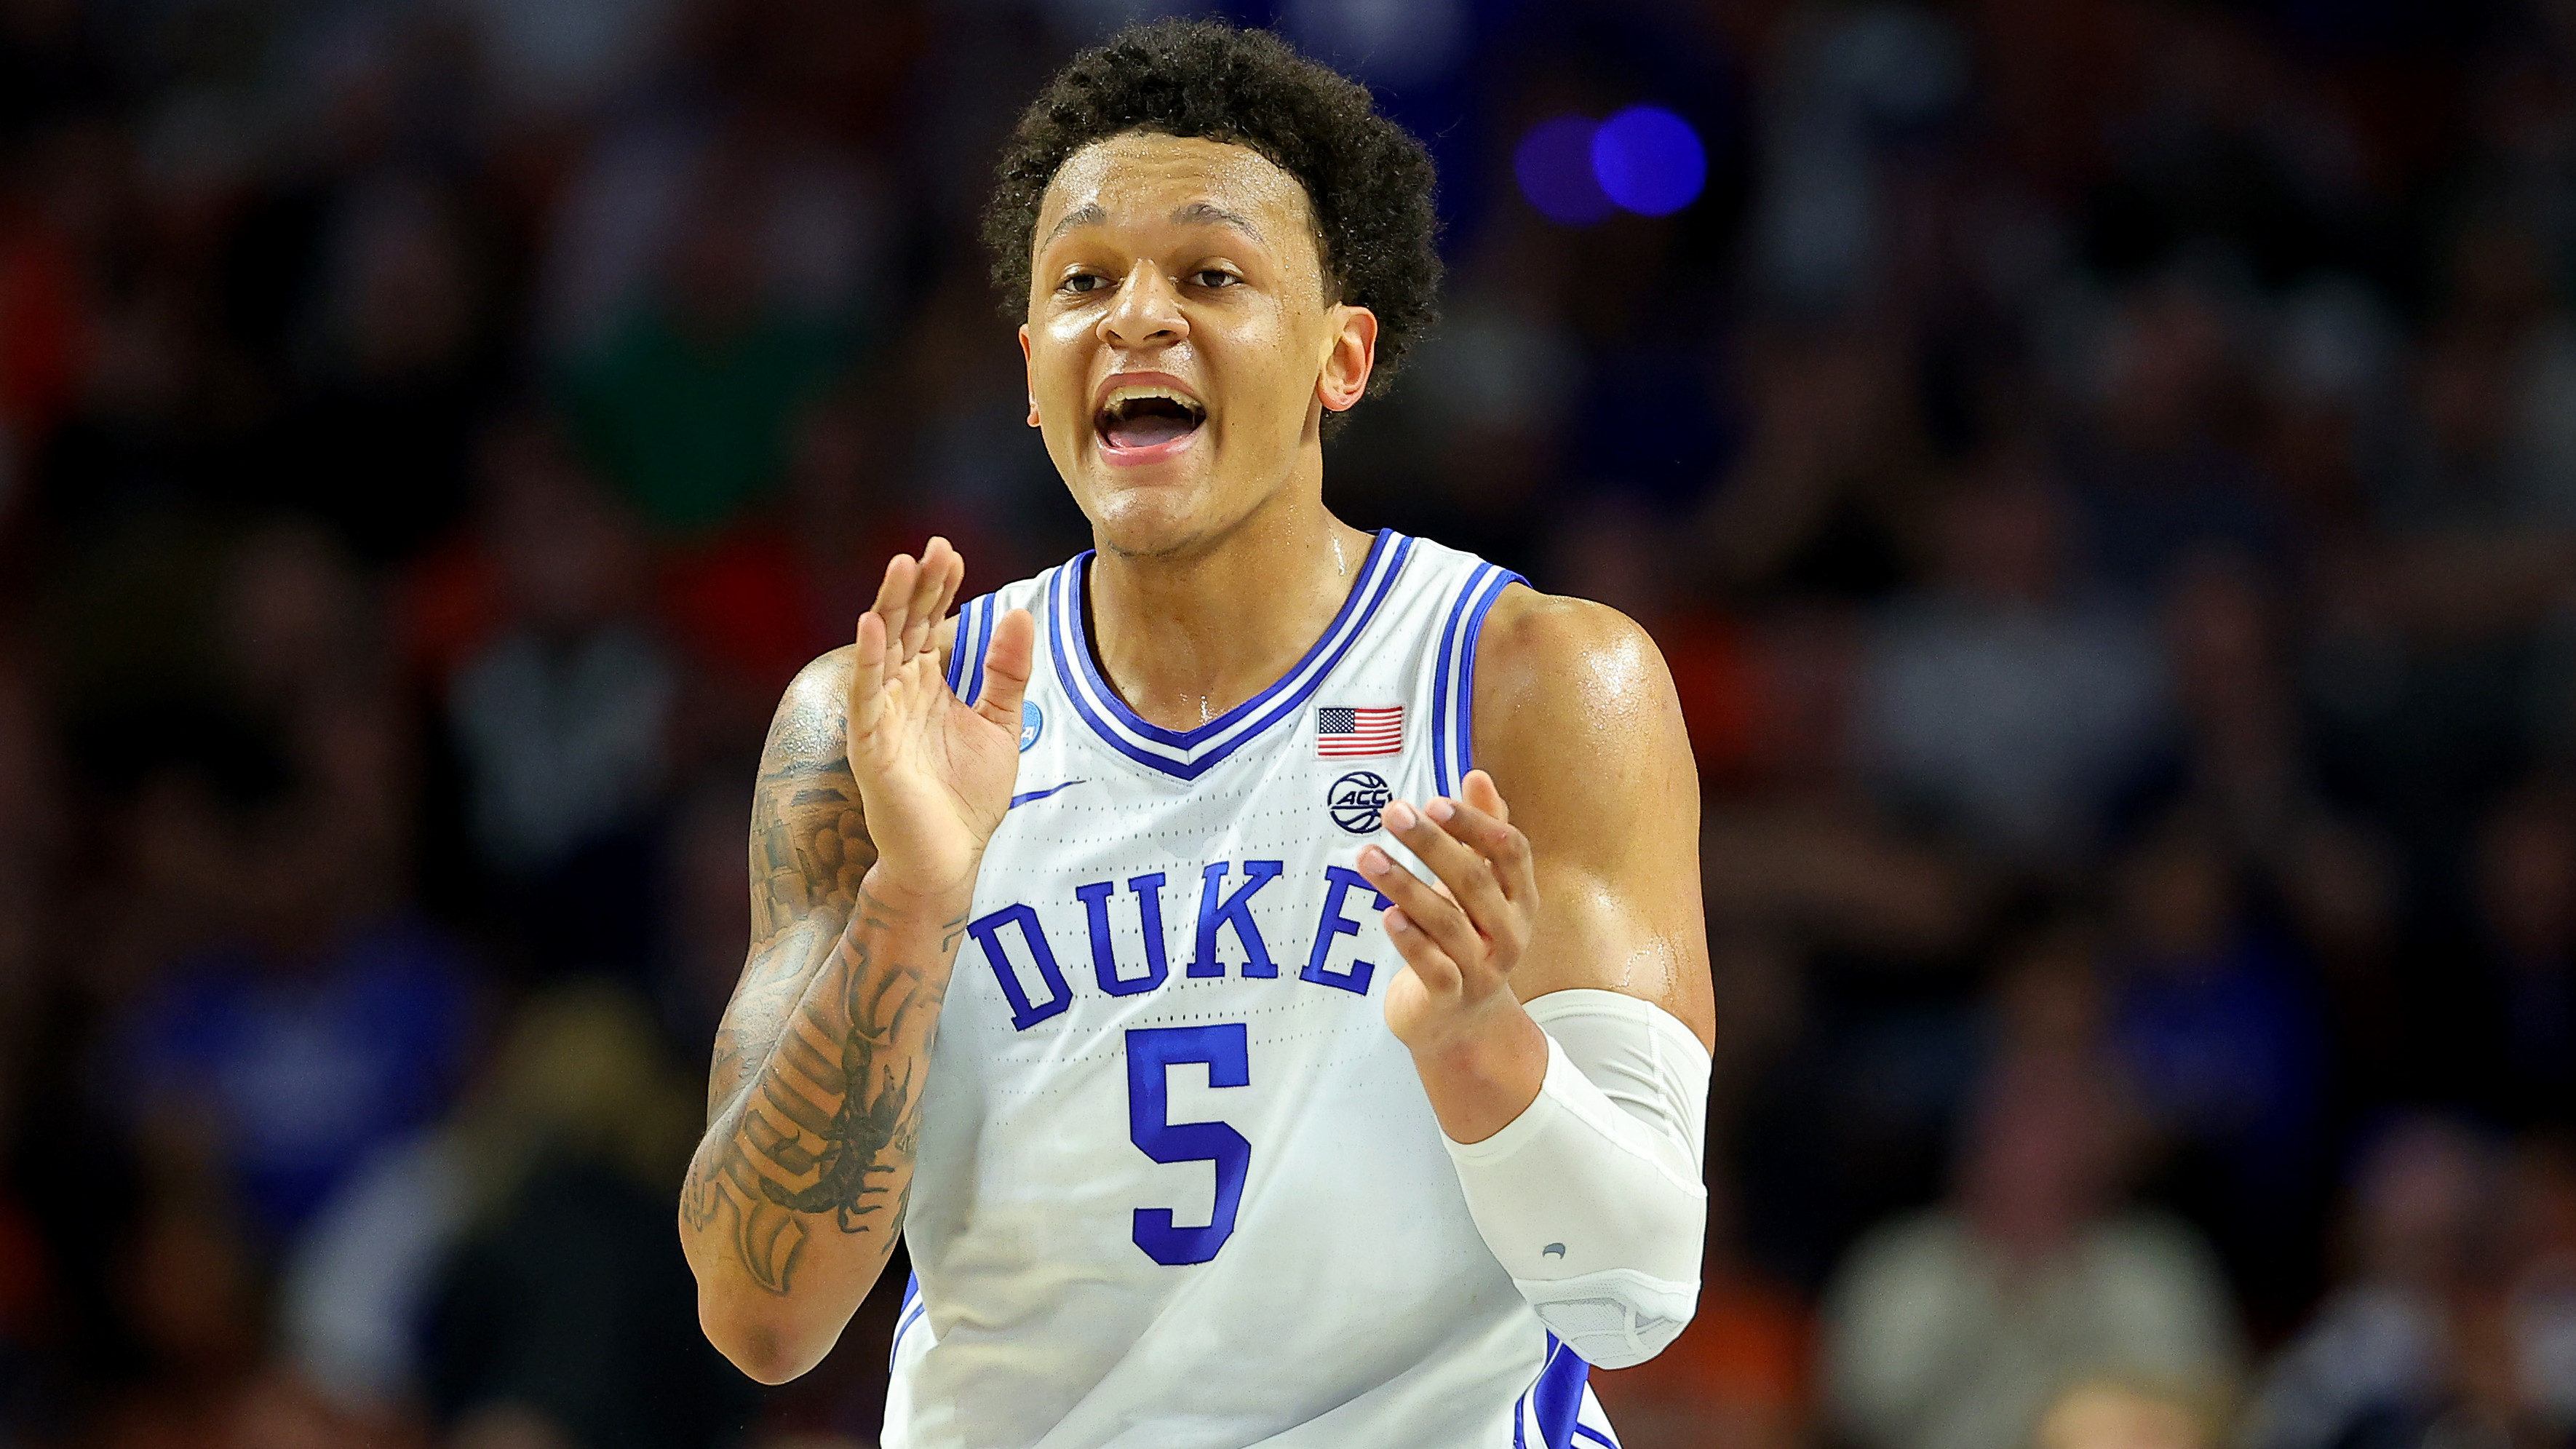 Duke's Trevor Keels takes one-and-done leap to NBA draft